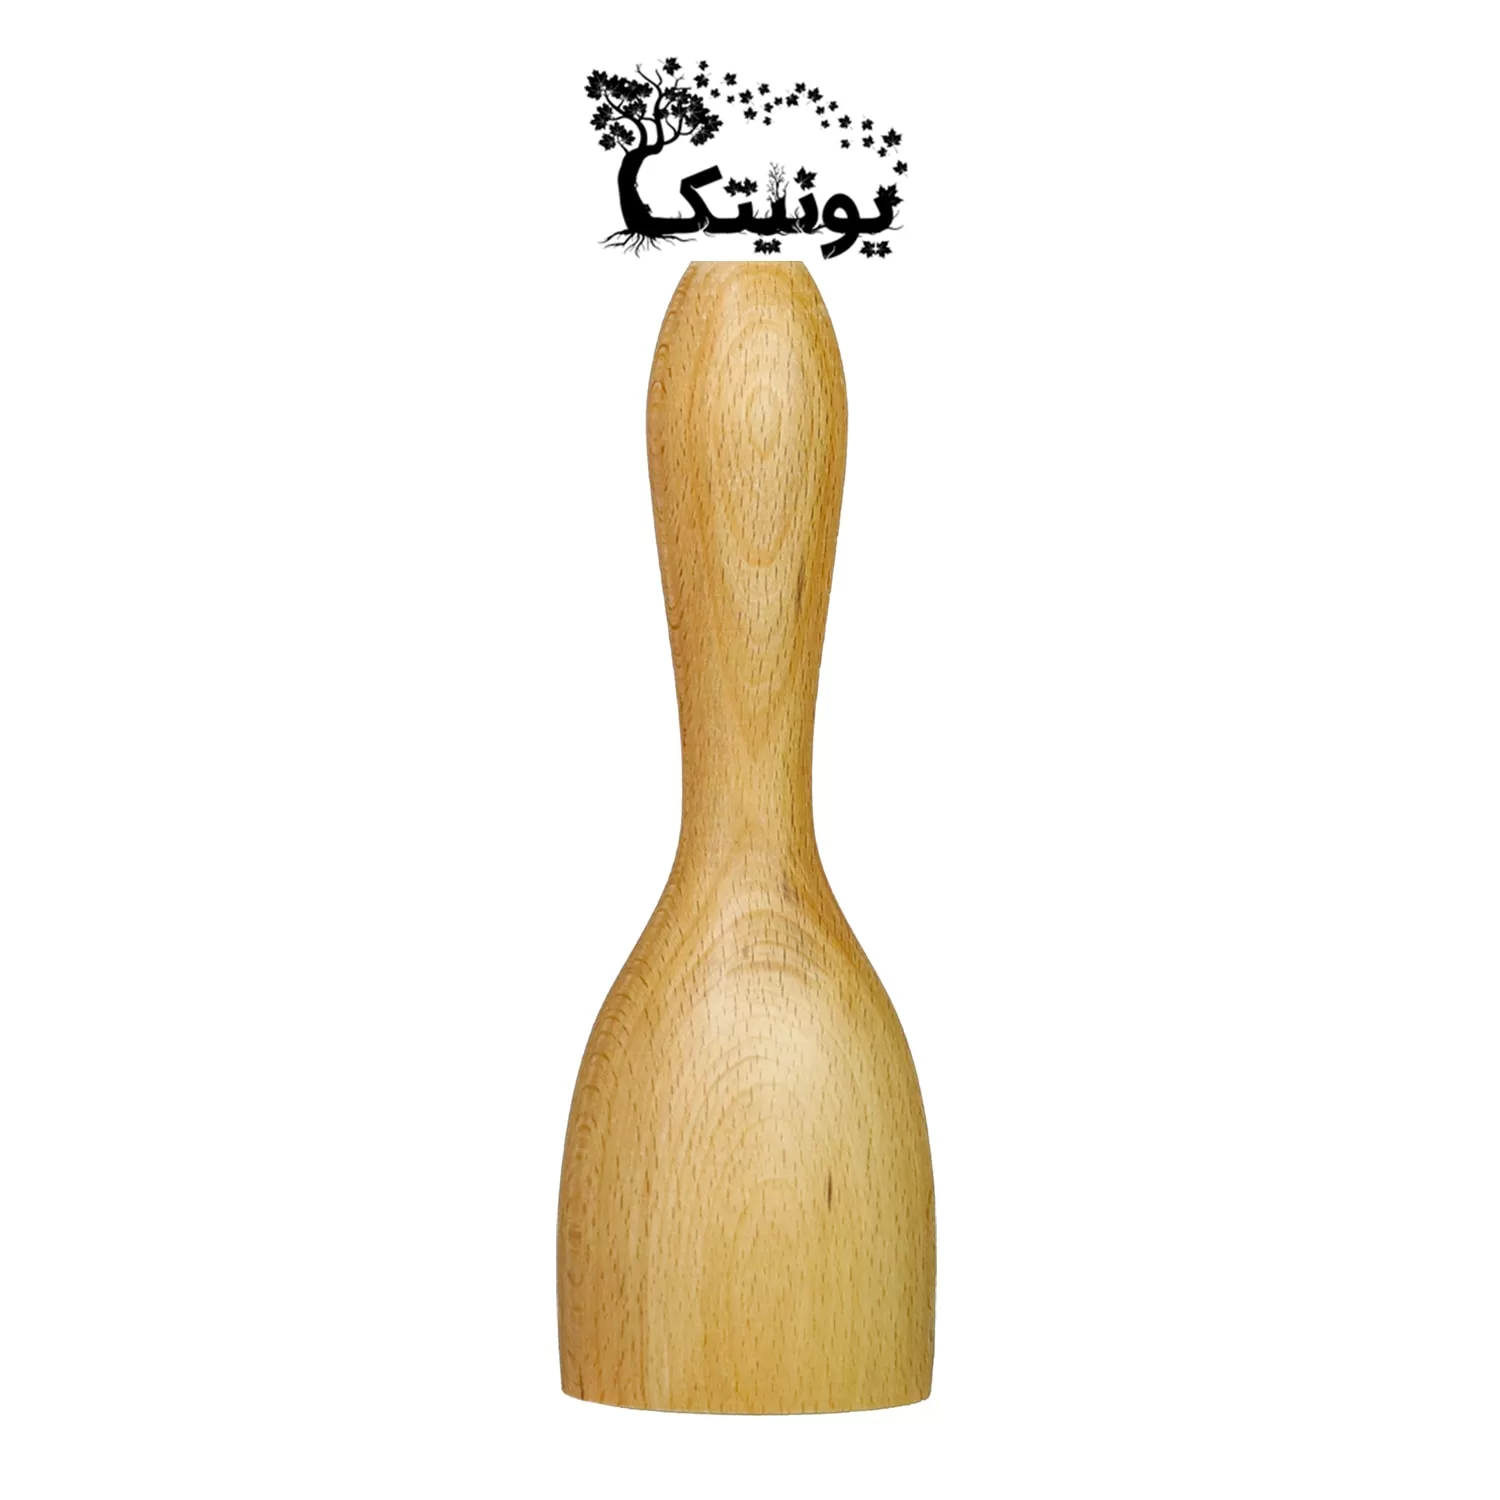 The unitak wooden meat masher model 73 is beautiful and of high quality.